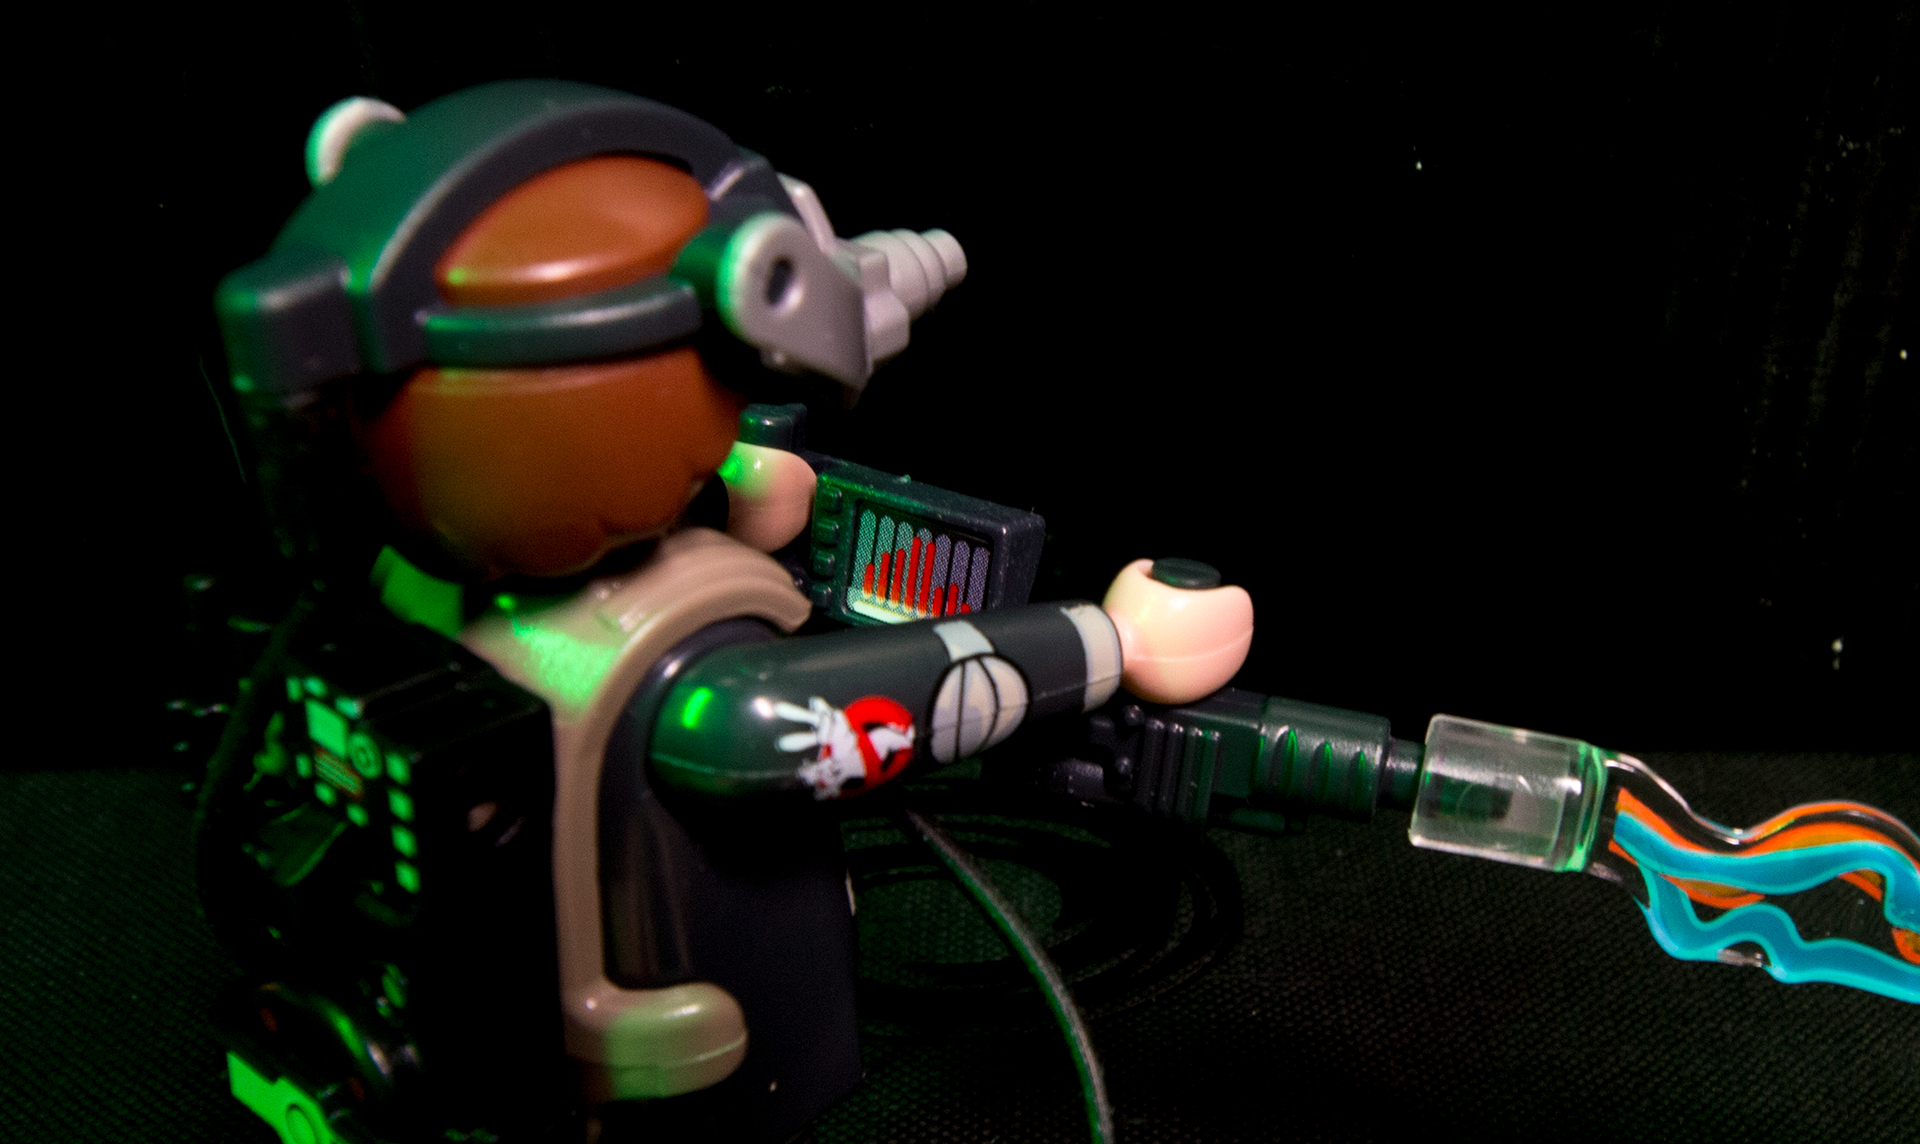 Playmobil’s Ghostbusters Toys Gear Up For The Sequel